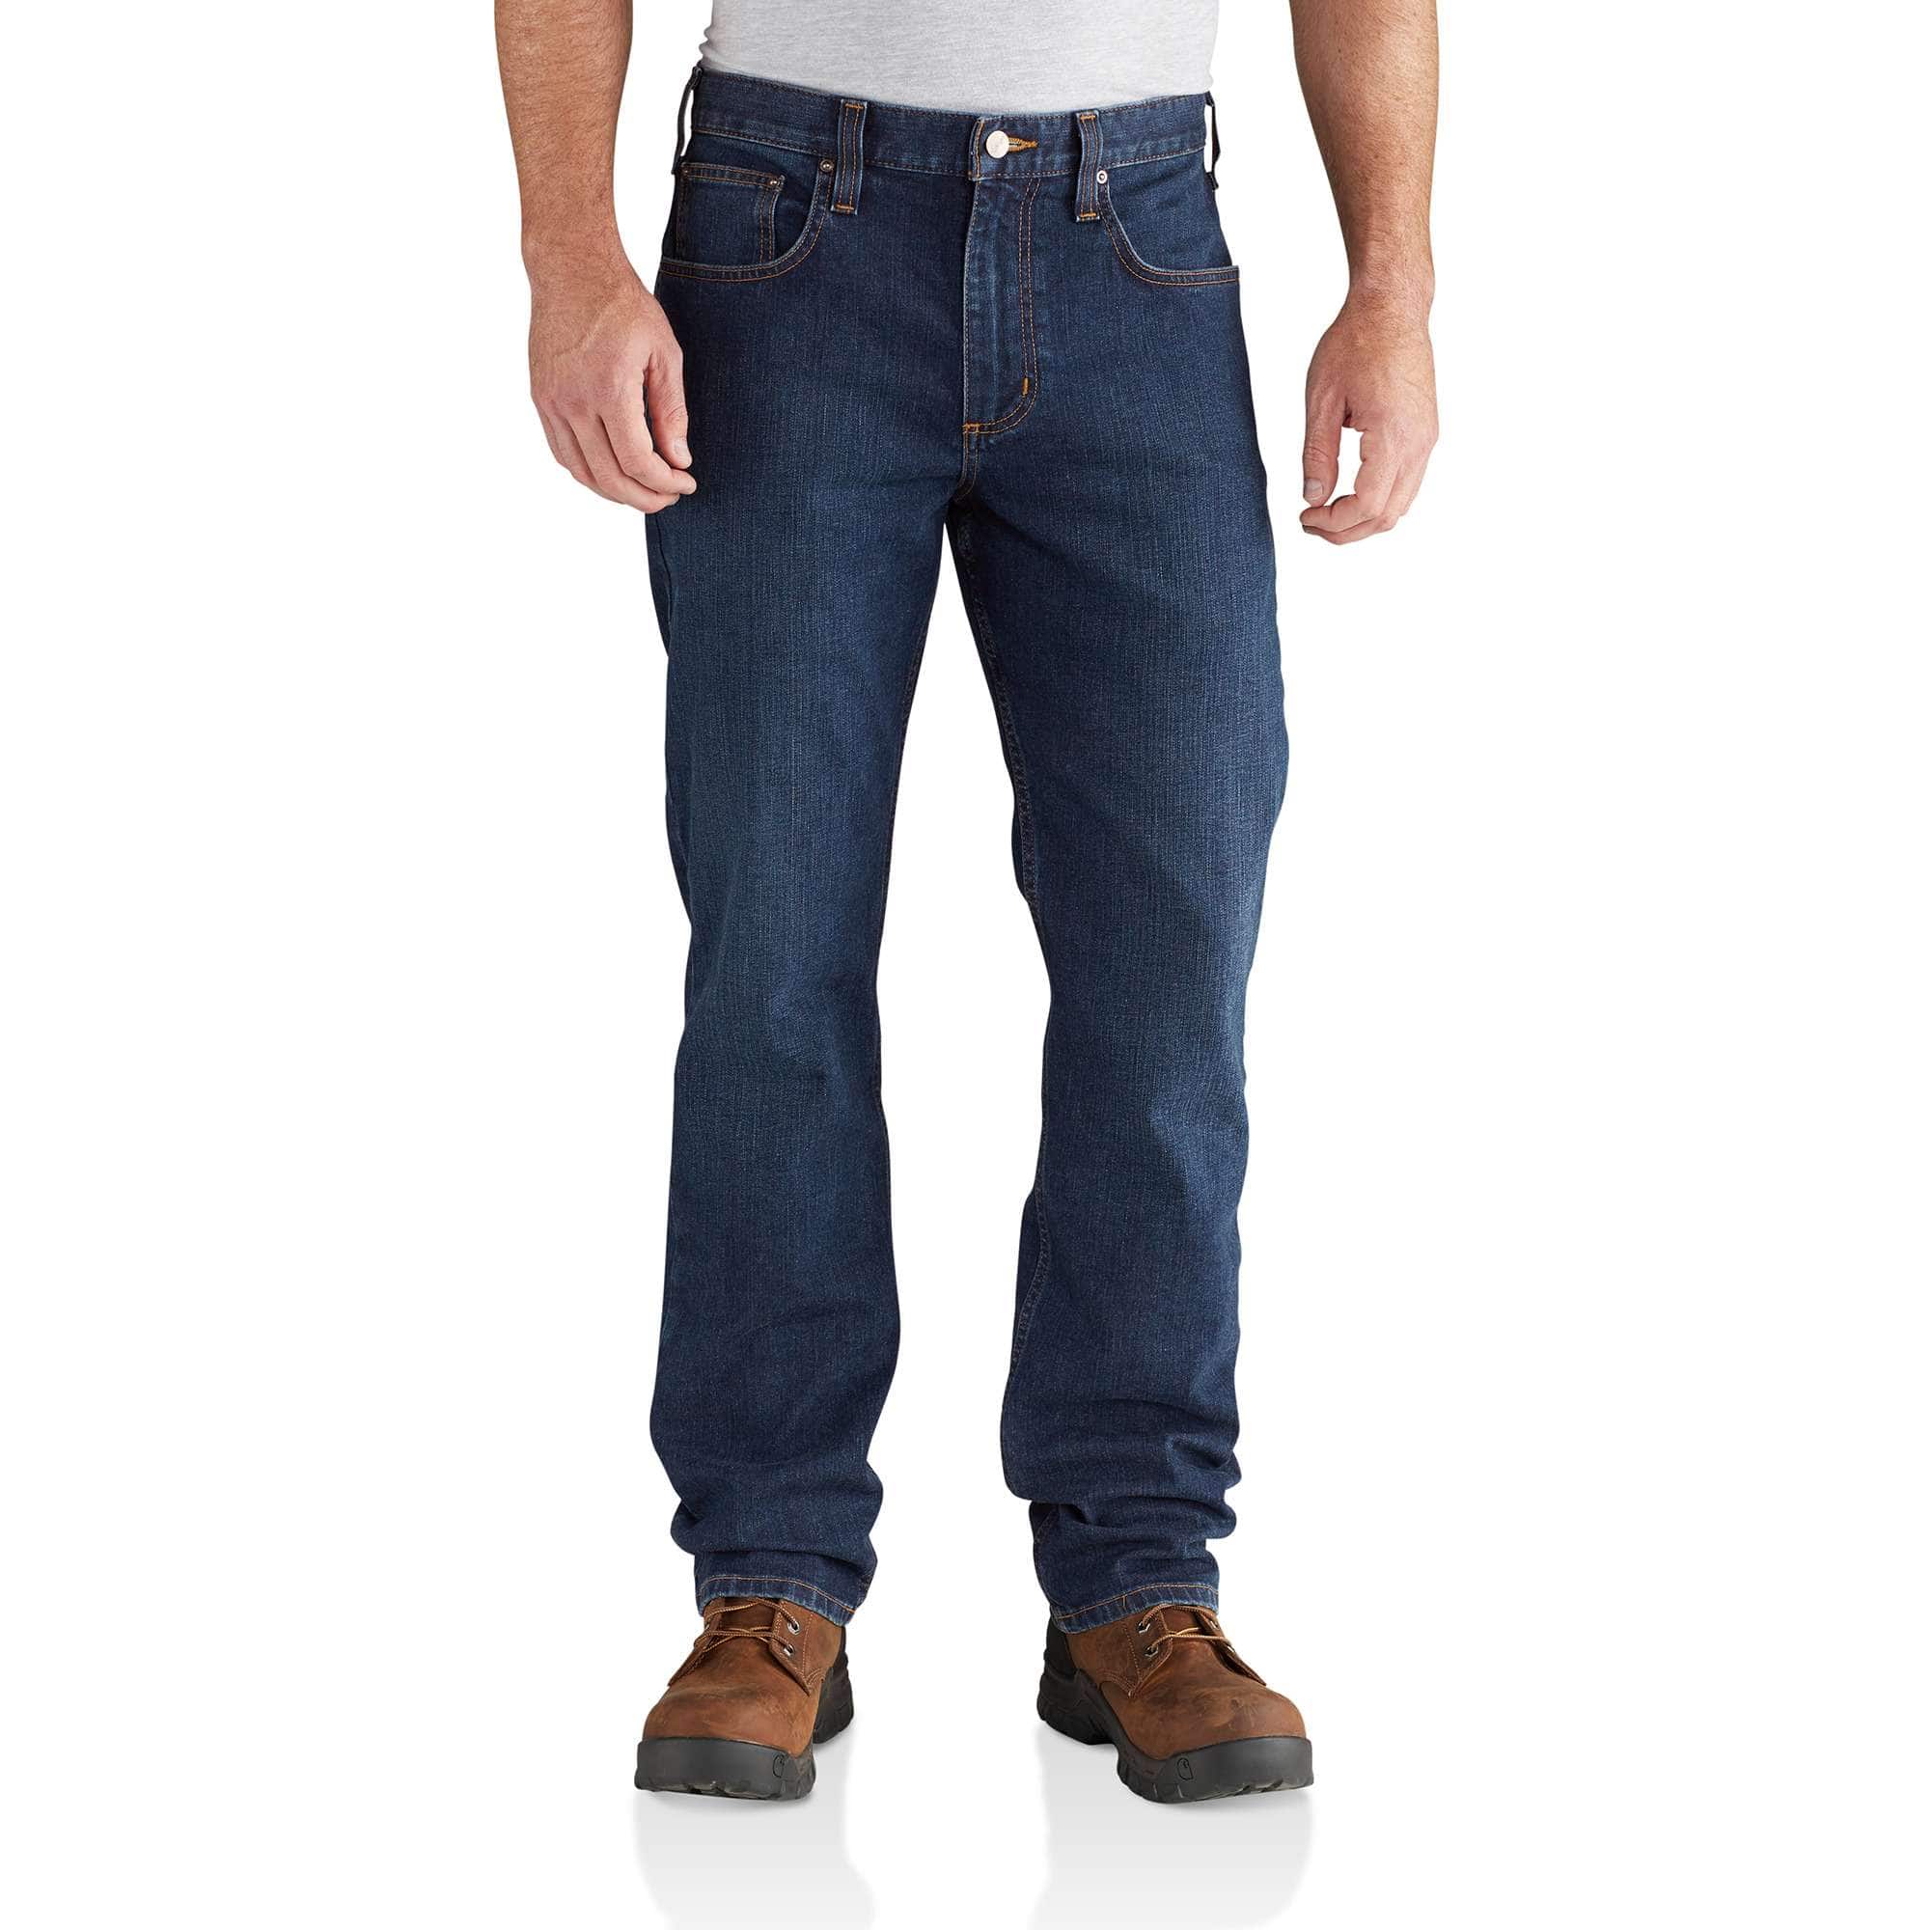 Carhartt Rugged Flex Relaxed Straight Jeans Uomo